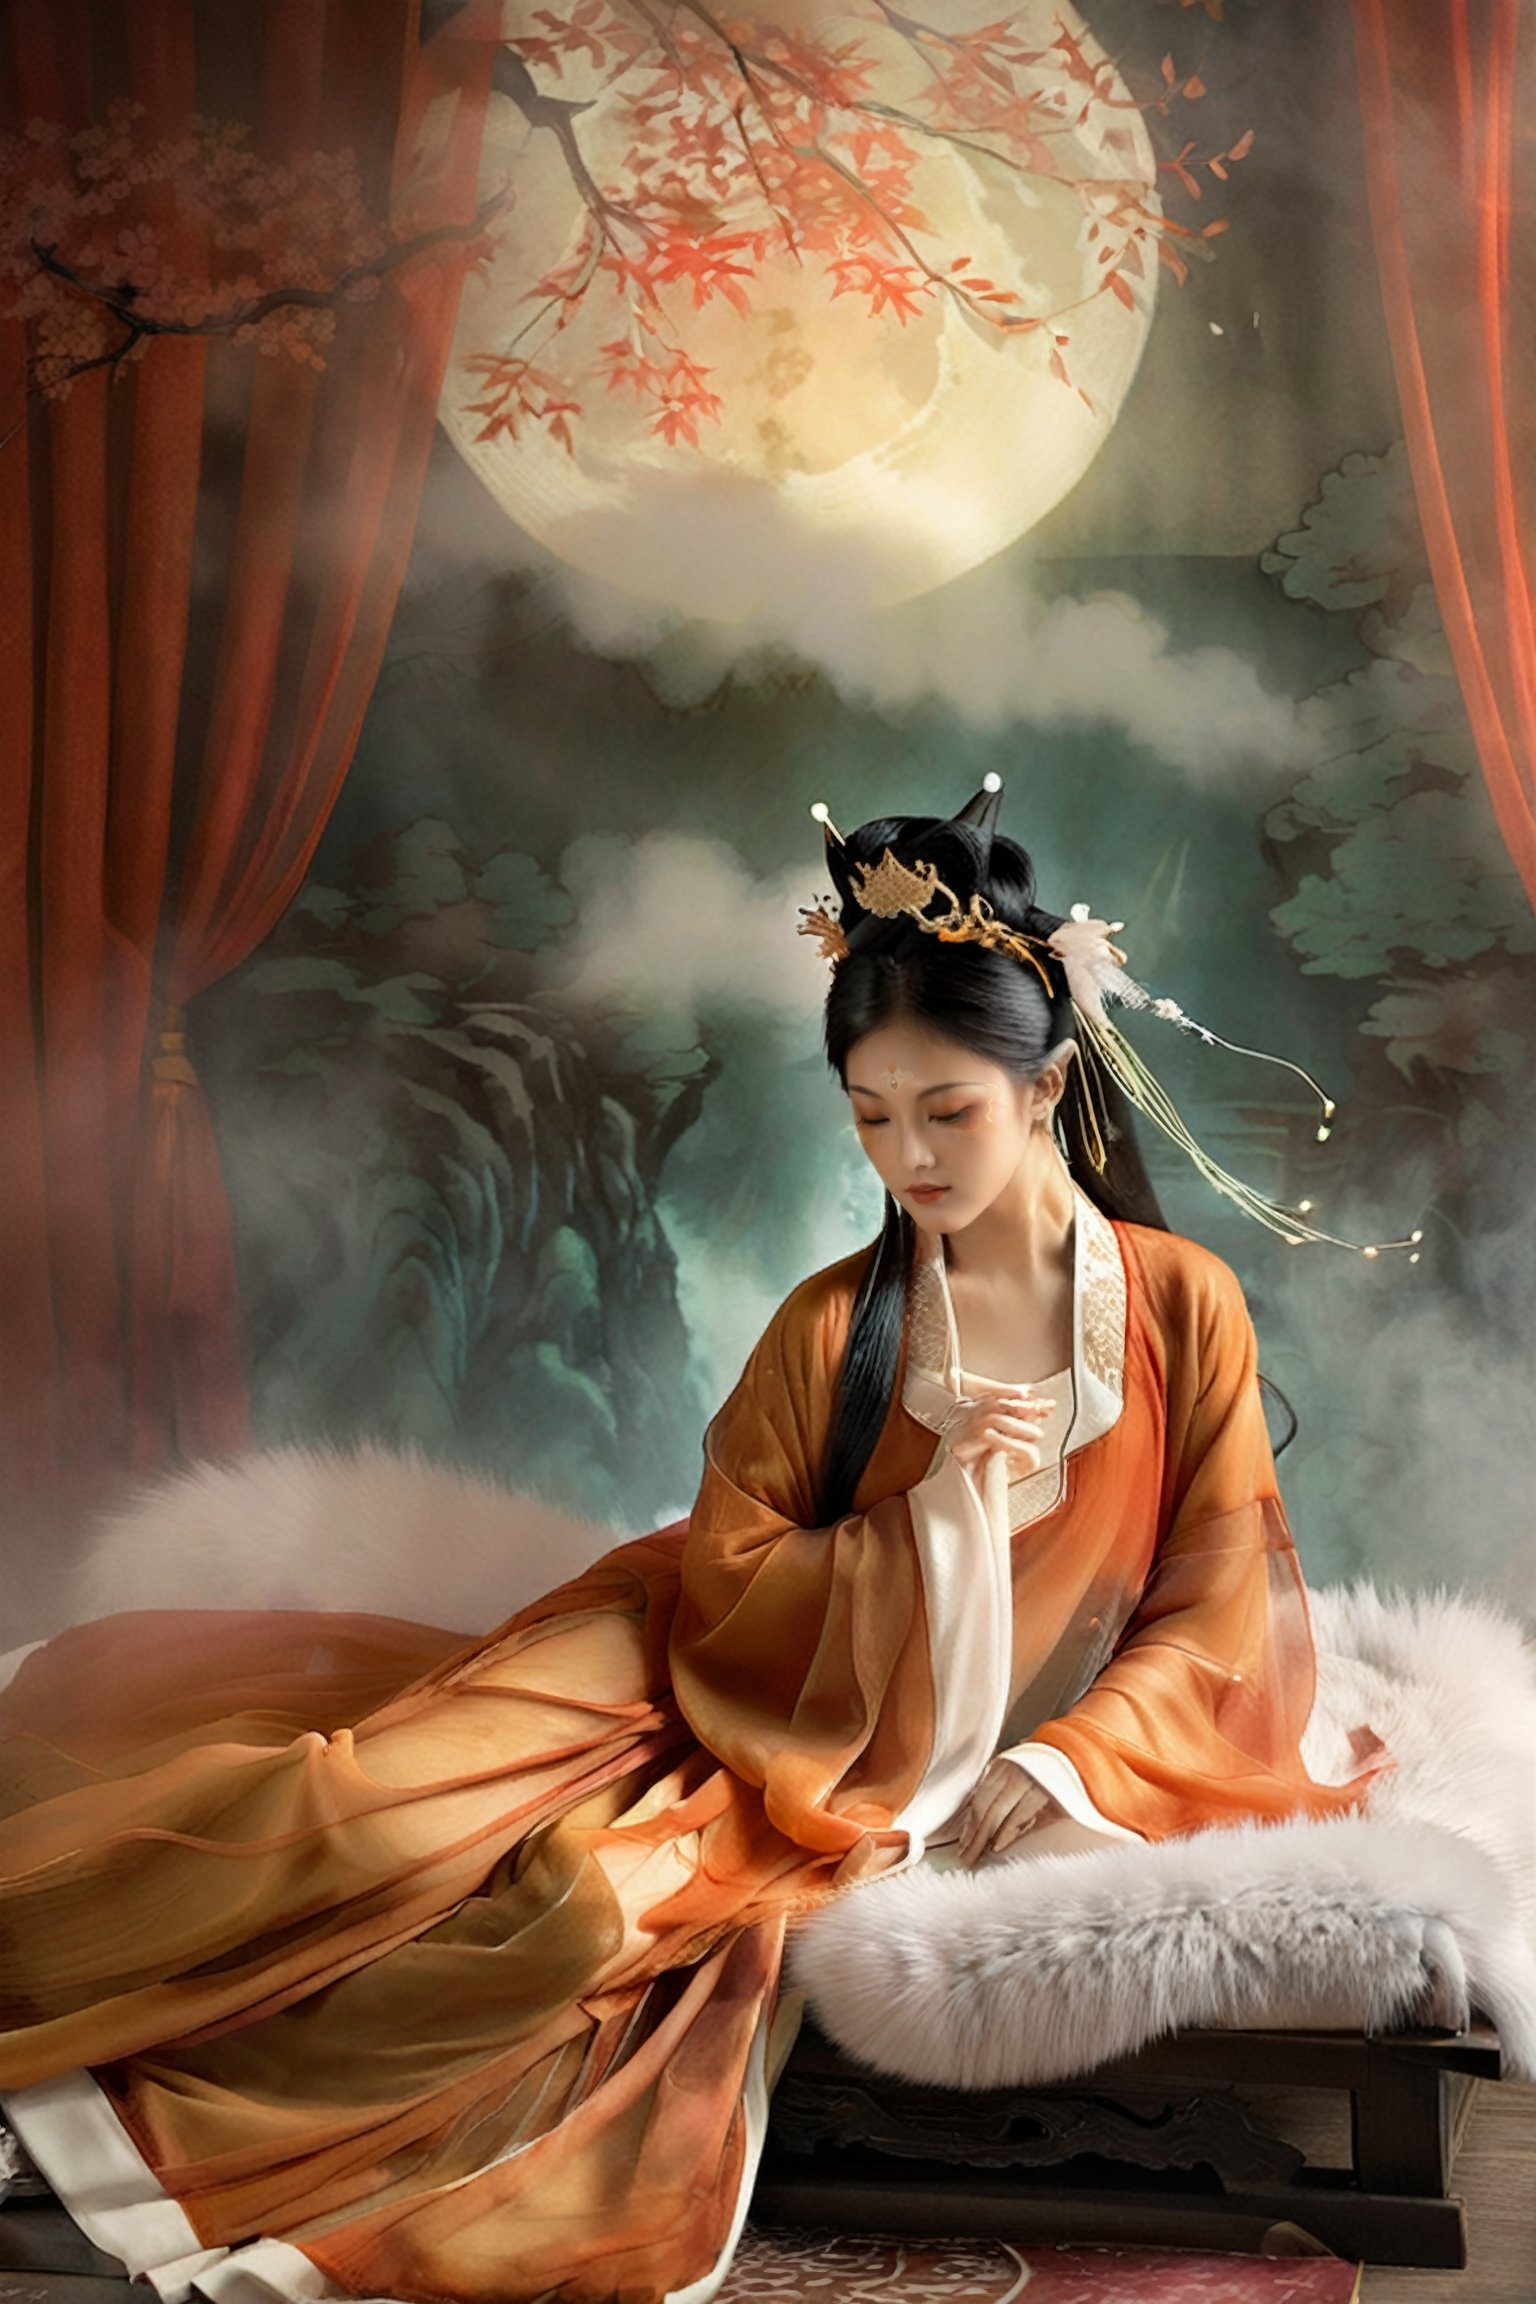 Dim prompt As String = "Artistic Image Types: {An artistic representation of a nine-tailed fox spirit with exquisite Tang dynasty attire,  gracefully lying on a traditional Chinese bed. Her hand delicately holds a fan,  emanating timeless elegance. The backdrop features flowing red translucent curtains that cast an ethereal glow,  and the scene is artistically composed with creative lighting and misty smoke effects,  creating a dreamlike atmosphere. The fox spirit's expression is serene and introspective,  as if lost in thought,  evoking tranquil beauty and cultural richness.},  Digital Illustration,  Artistic style,  Capturing the ethereal essence of a nine-tailed fox spirit,  High resolution,  (nine-tailed fox spirit:1.2),  (Tang dynasty attire:1.15),  (artistic representation:1.18),  (ethereal glow:1.12),  (dreamlike atmosphere:1.16),  (serene expression:1.2),  (tranquil beauty:1.18),  (cultural richness:1.15),  (exquisite details:1.12),  (creative lighting:1.16),  (mystic allure:1.2), <lora:EMS-37230-EMS:0.300000>